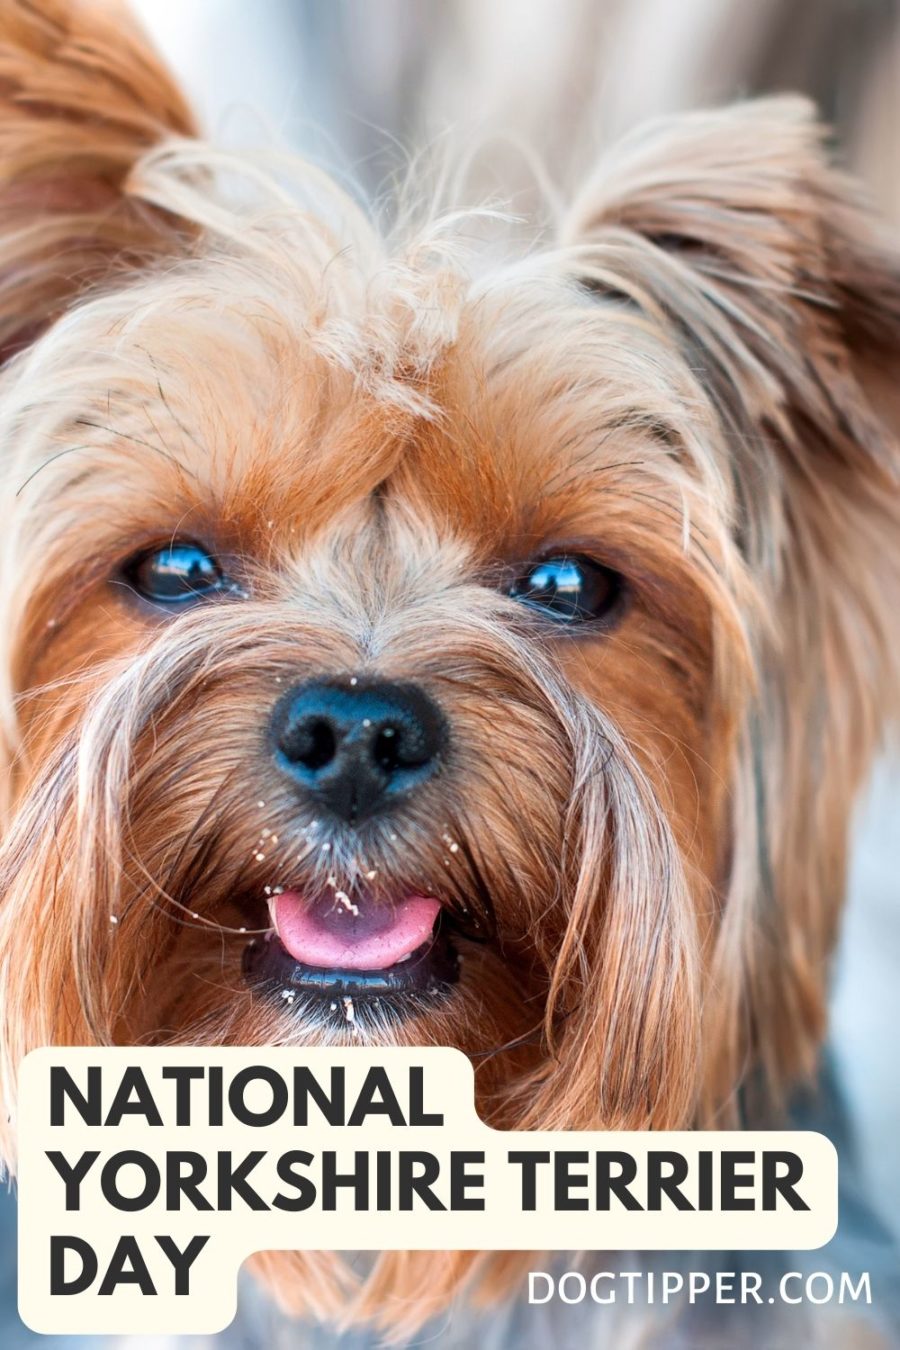 National Yorkshire Terrier Day, January 22